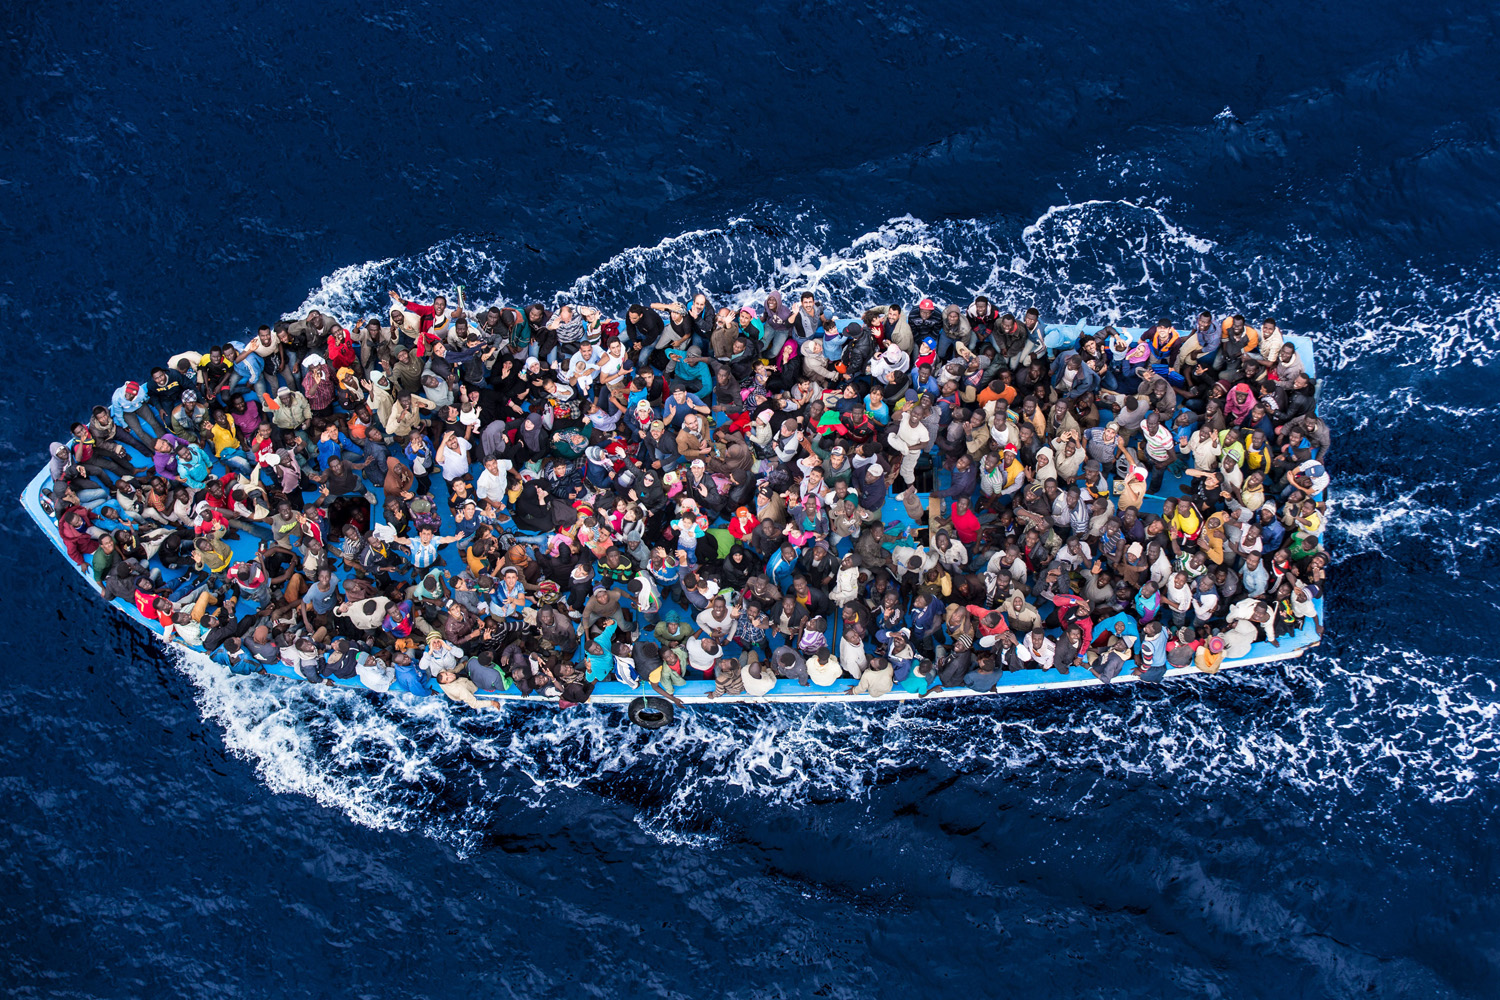 Italian navy rescues asylum seekers traveling by boat off the coast of Africa in the Mediterranean Sea near Italy on June 7, 2014.